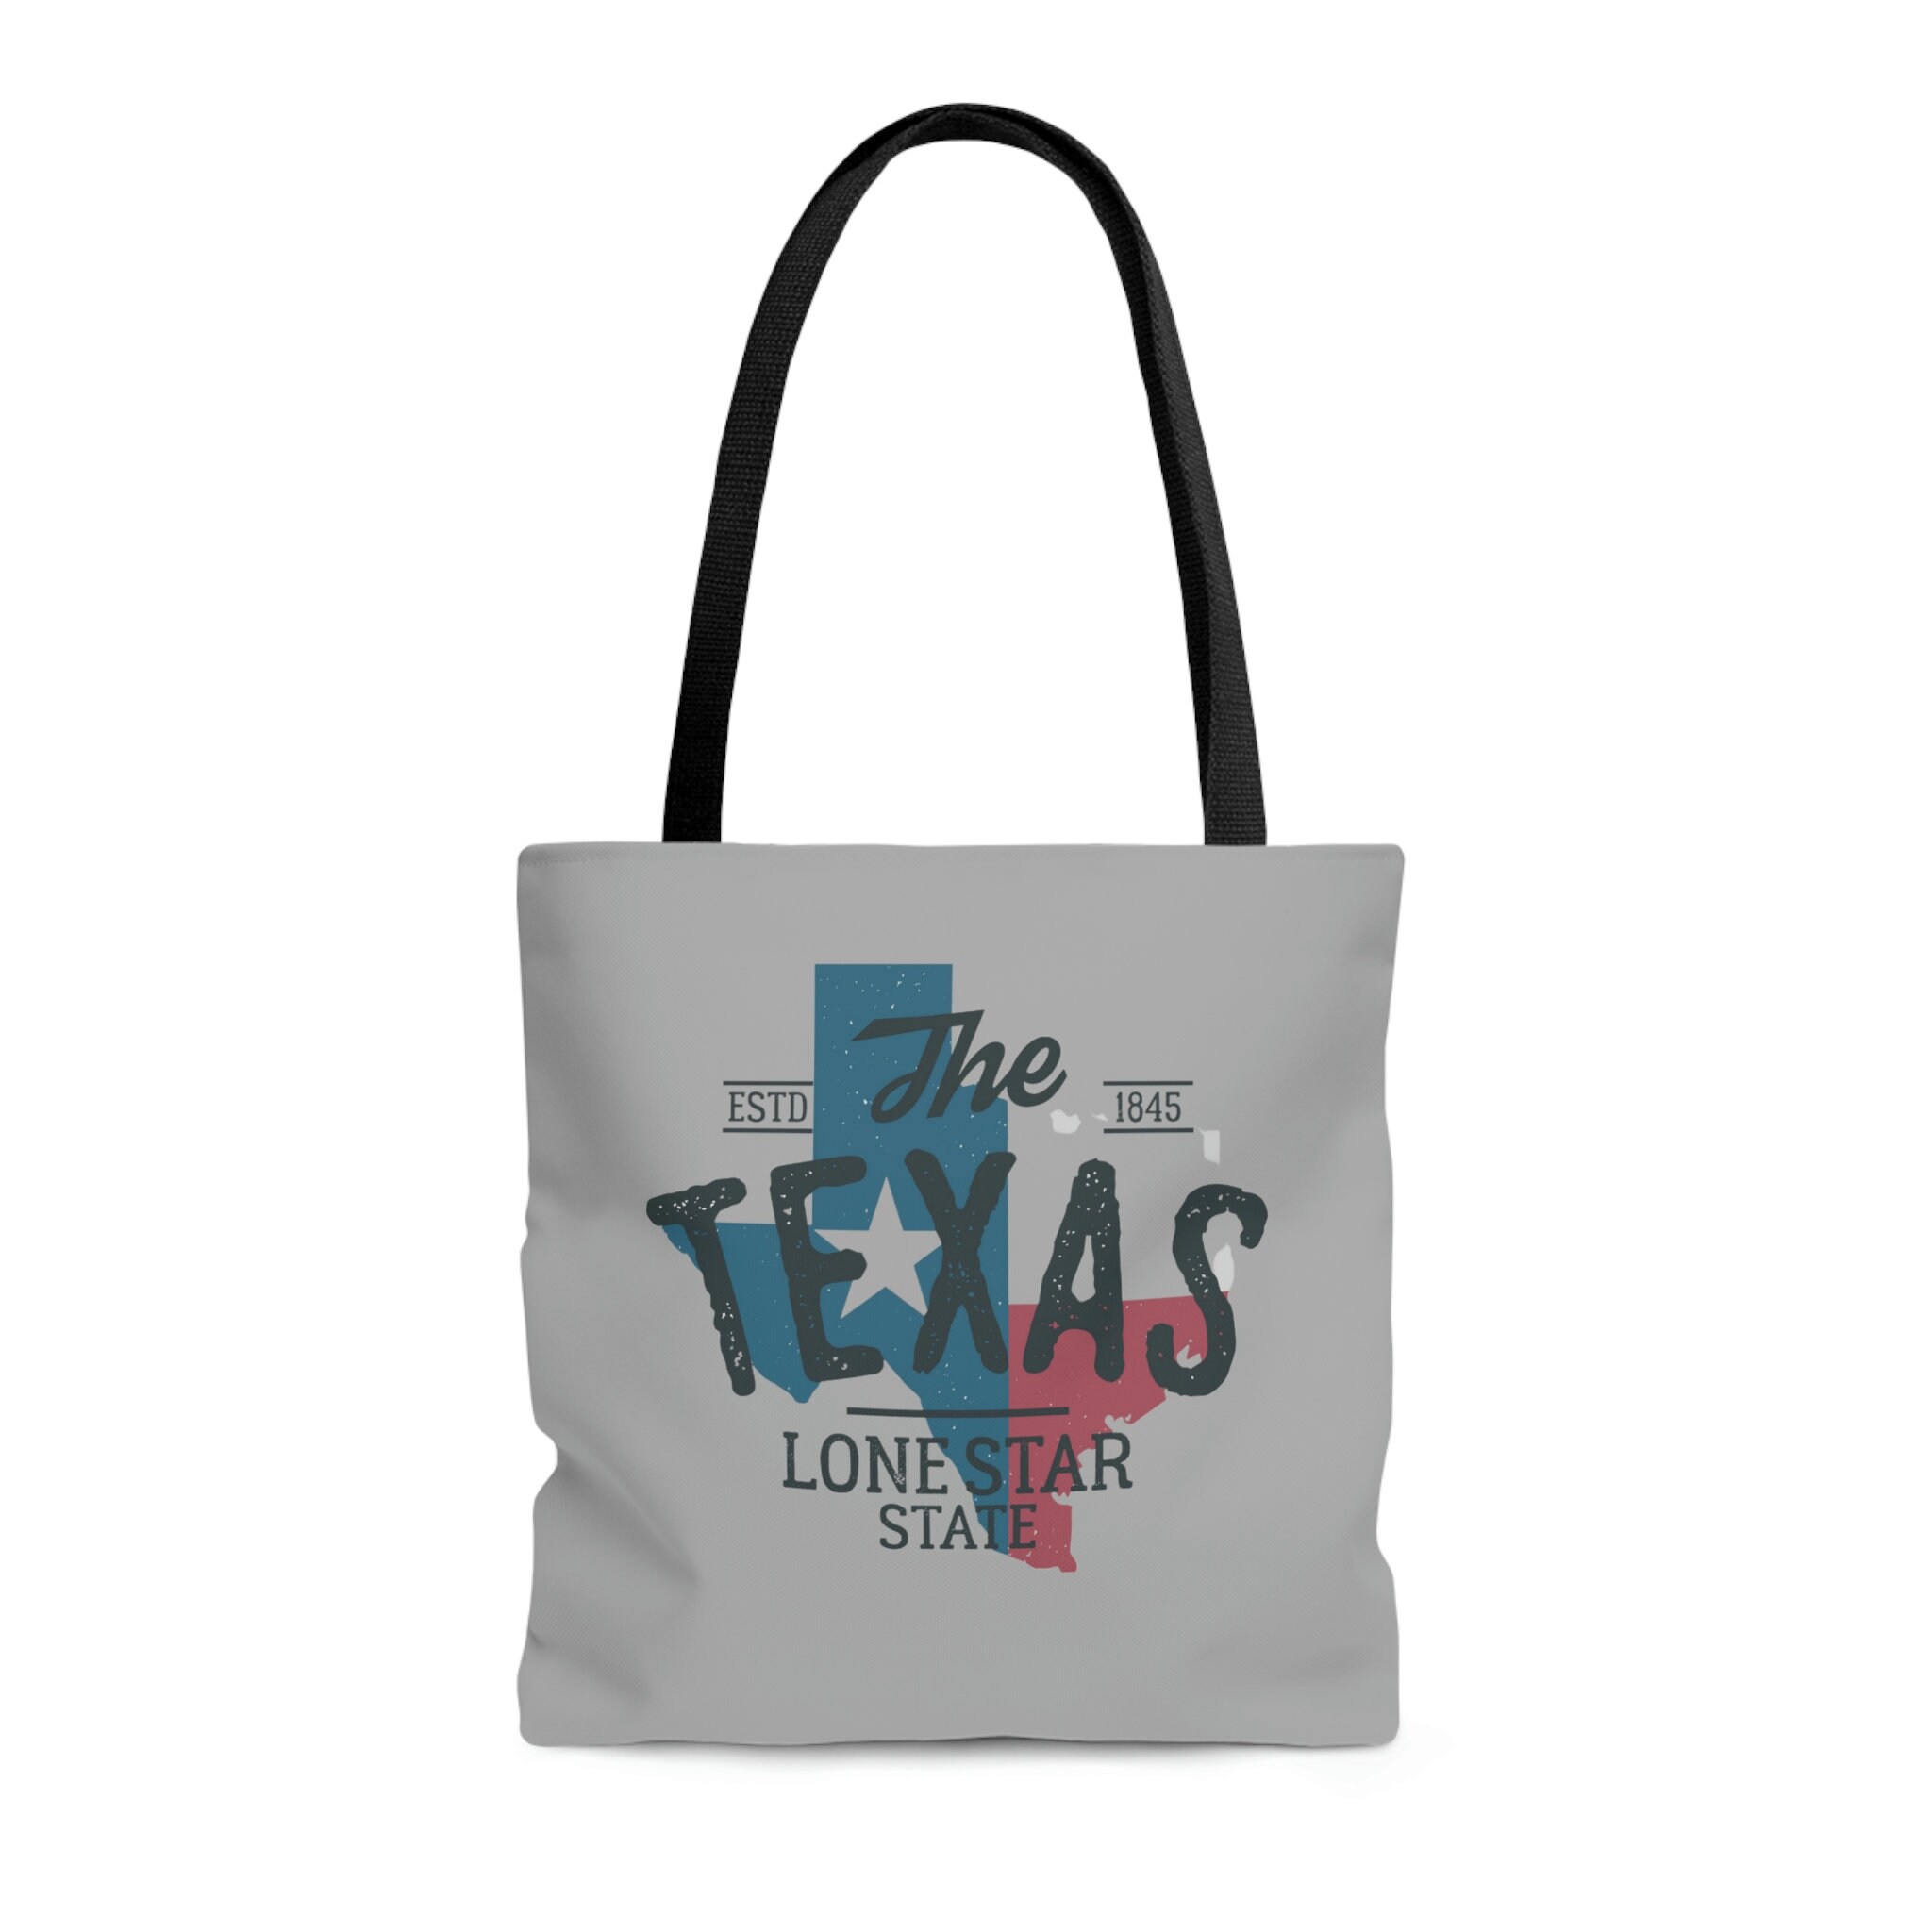 monogram tote bag – a lonestar state of southern